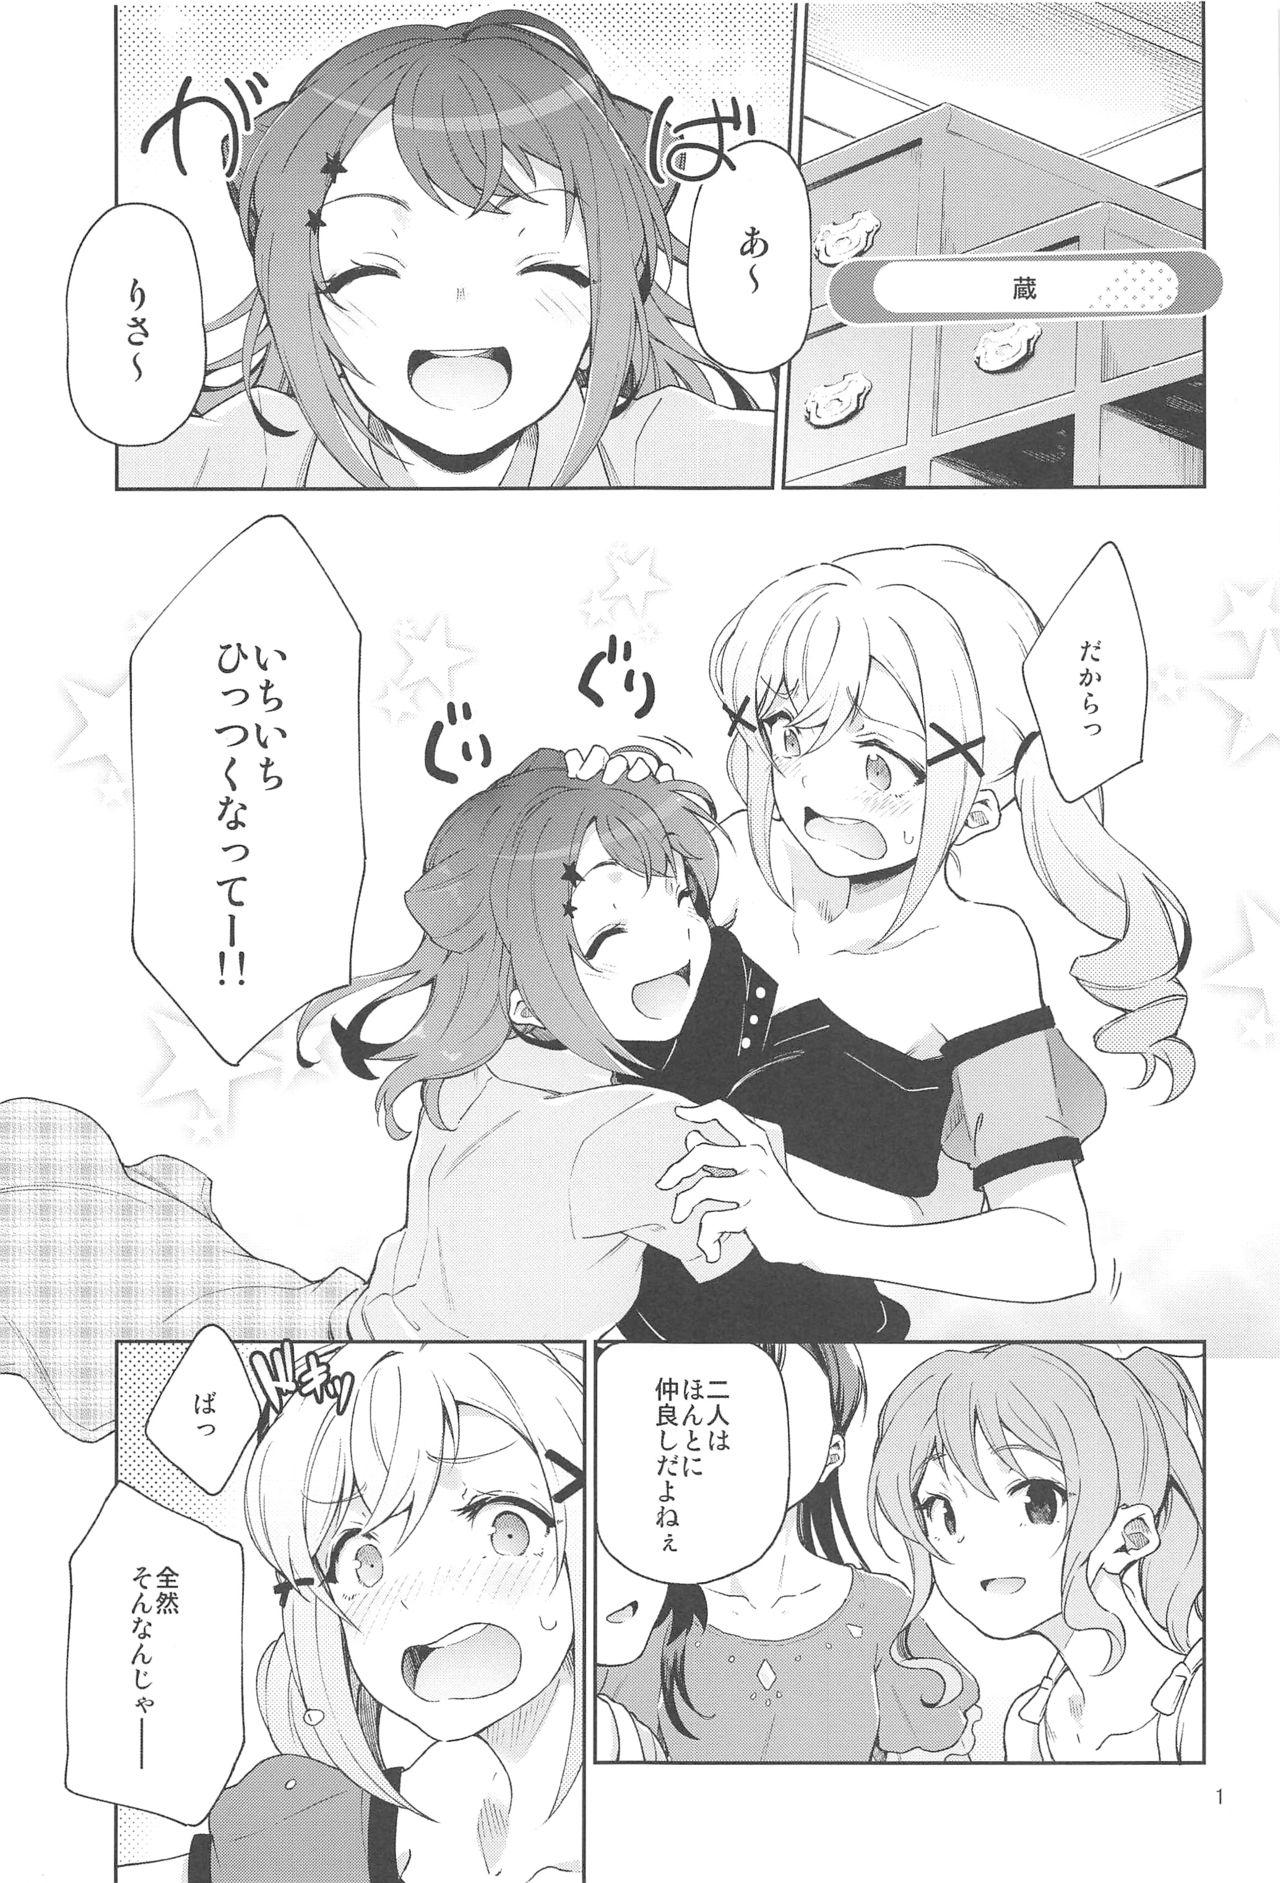 Animated Jealousy All Night - Bang dream Analfuck - Page 2